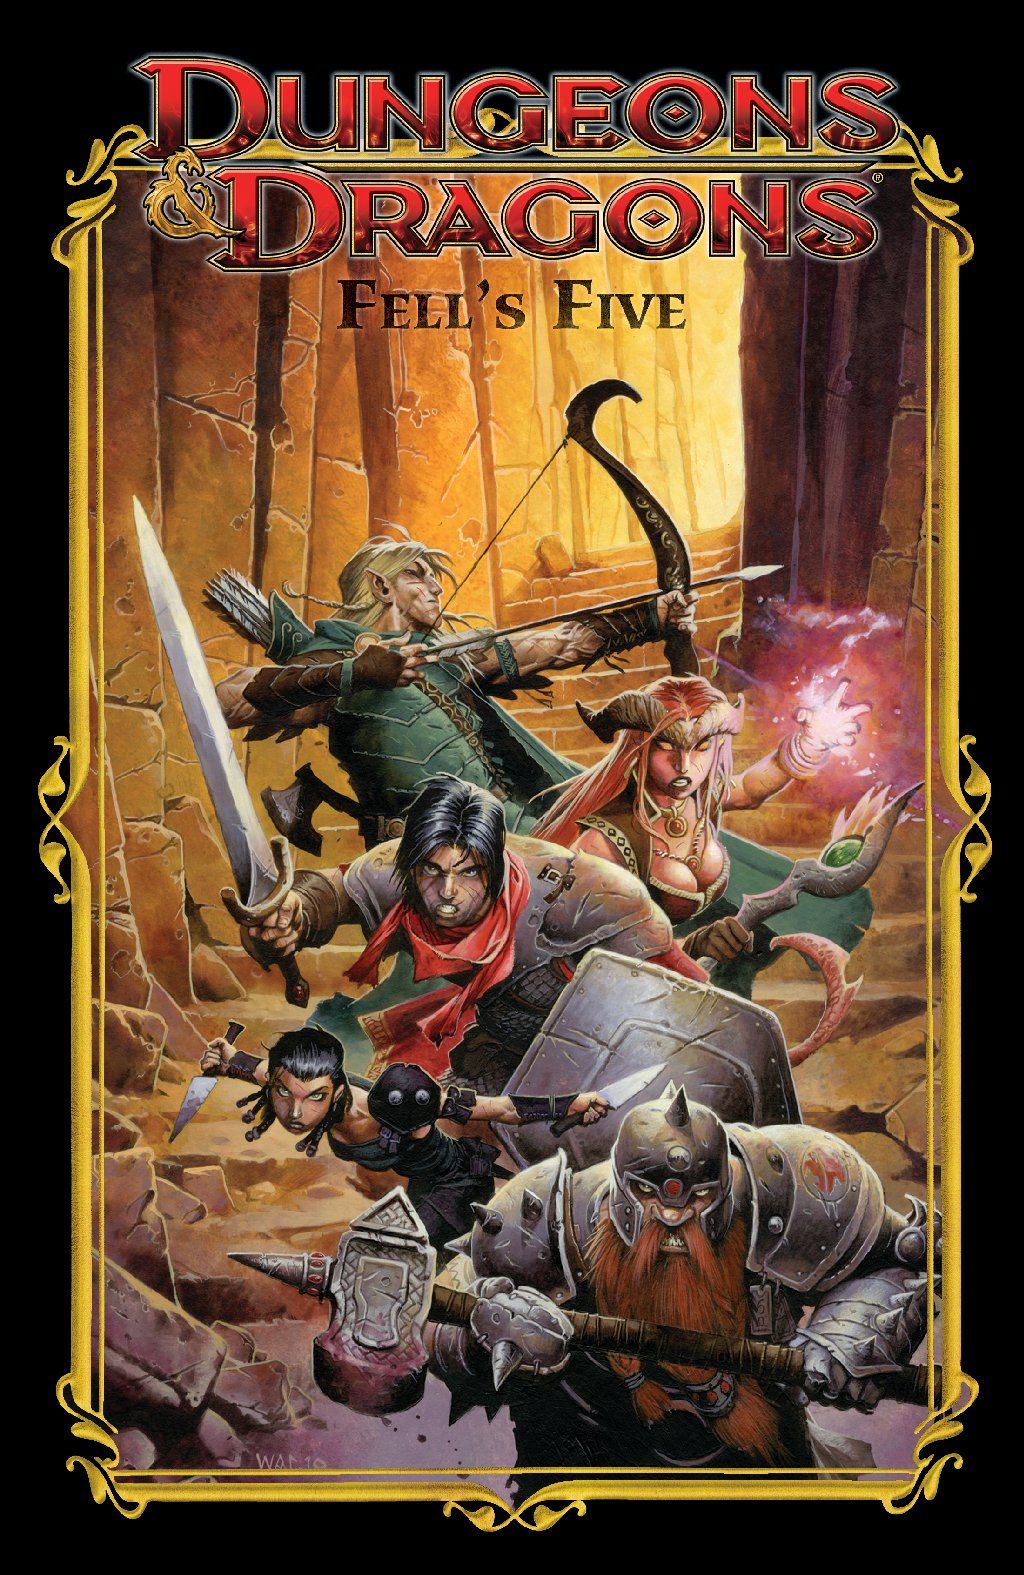 Dungeons & Dragons: Fell's Five